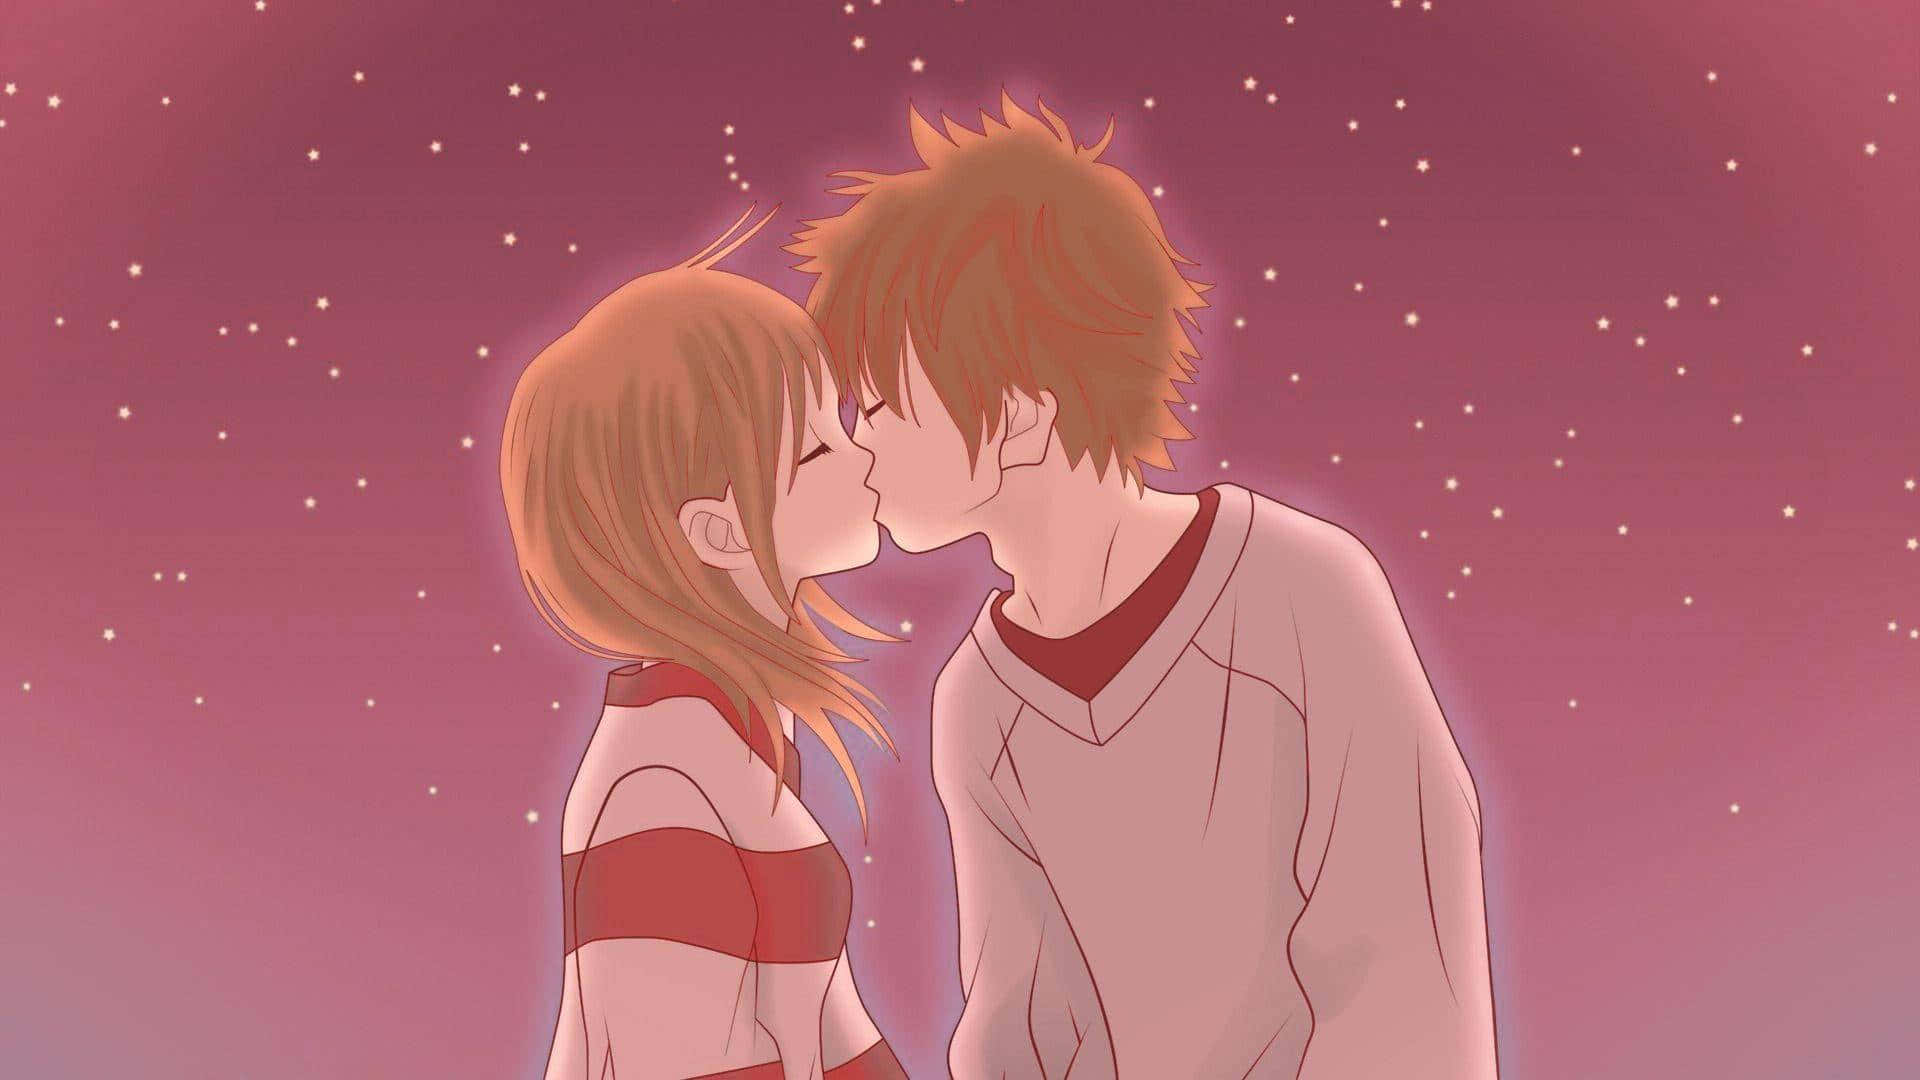 Anime cute couple images